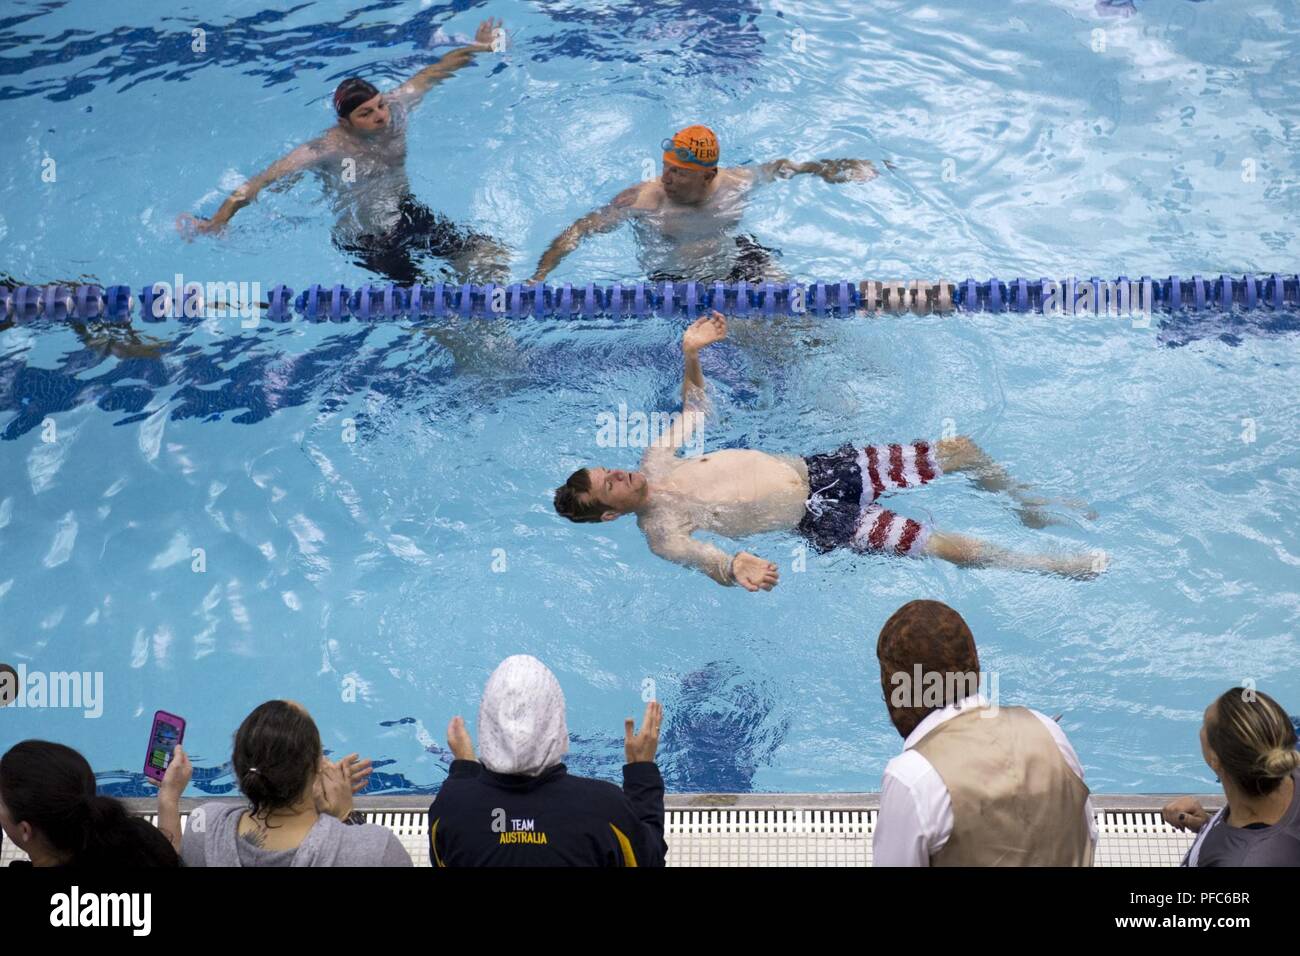 Team SOCOM veteran Capt. James Howard competes in the 2018 DoD Warrior Games swimming competition surrounded by supporters and competitors in the race at the Air Force Academy in Colorado Springs, Colo. June 8, 2018. Stock Photo